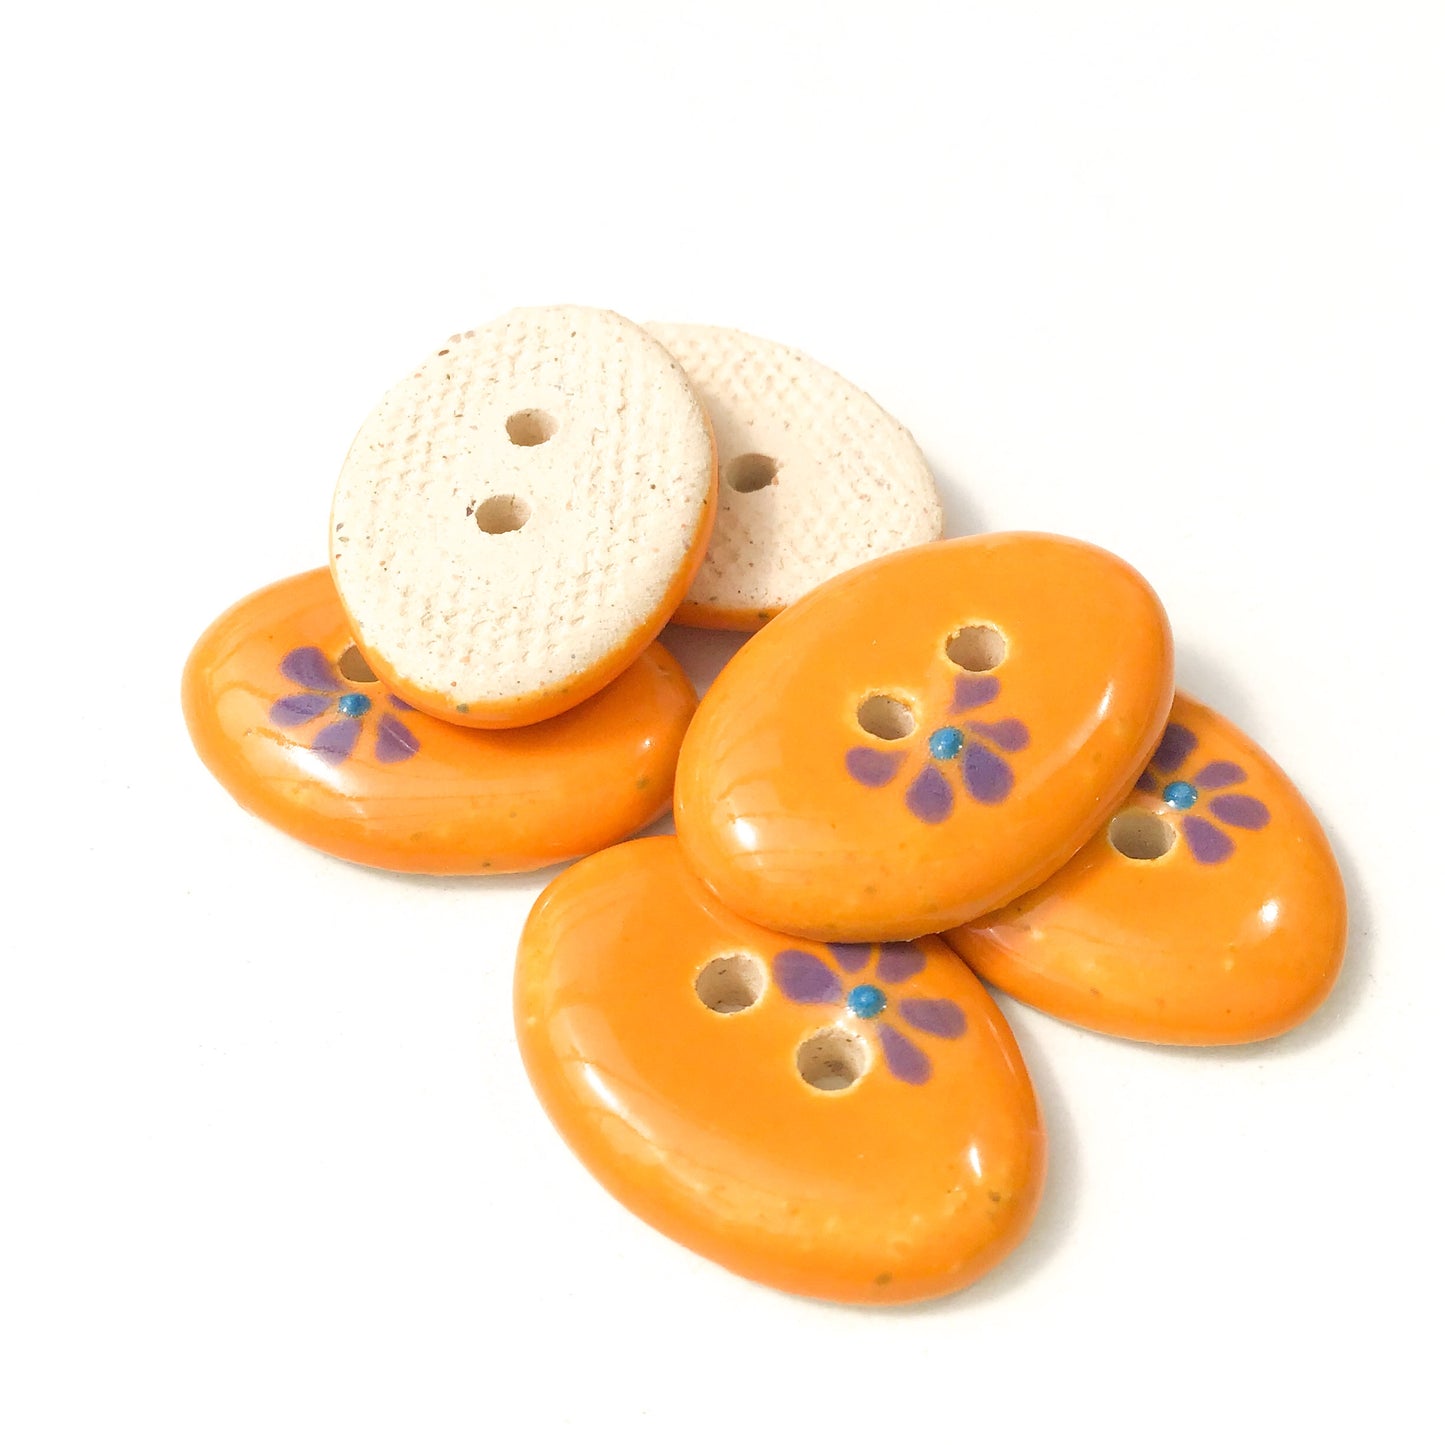 Decorative Oval Ceramic Buttons - Orange Clay Buttons with Purple Flowers - 5/8" x 7/8" - 6 Pack